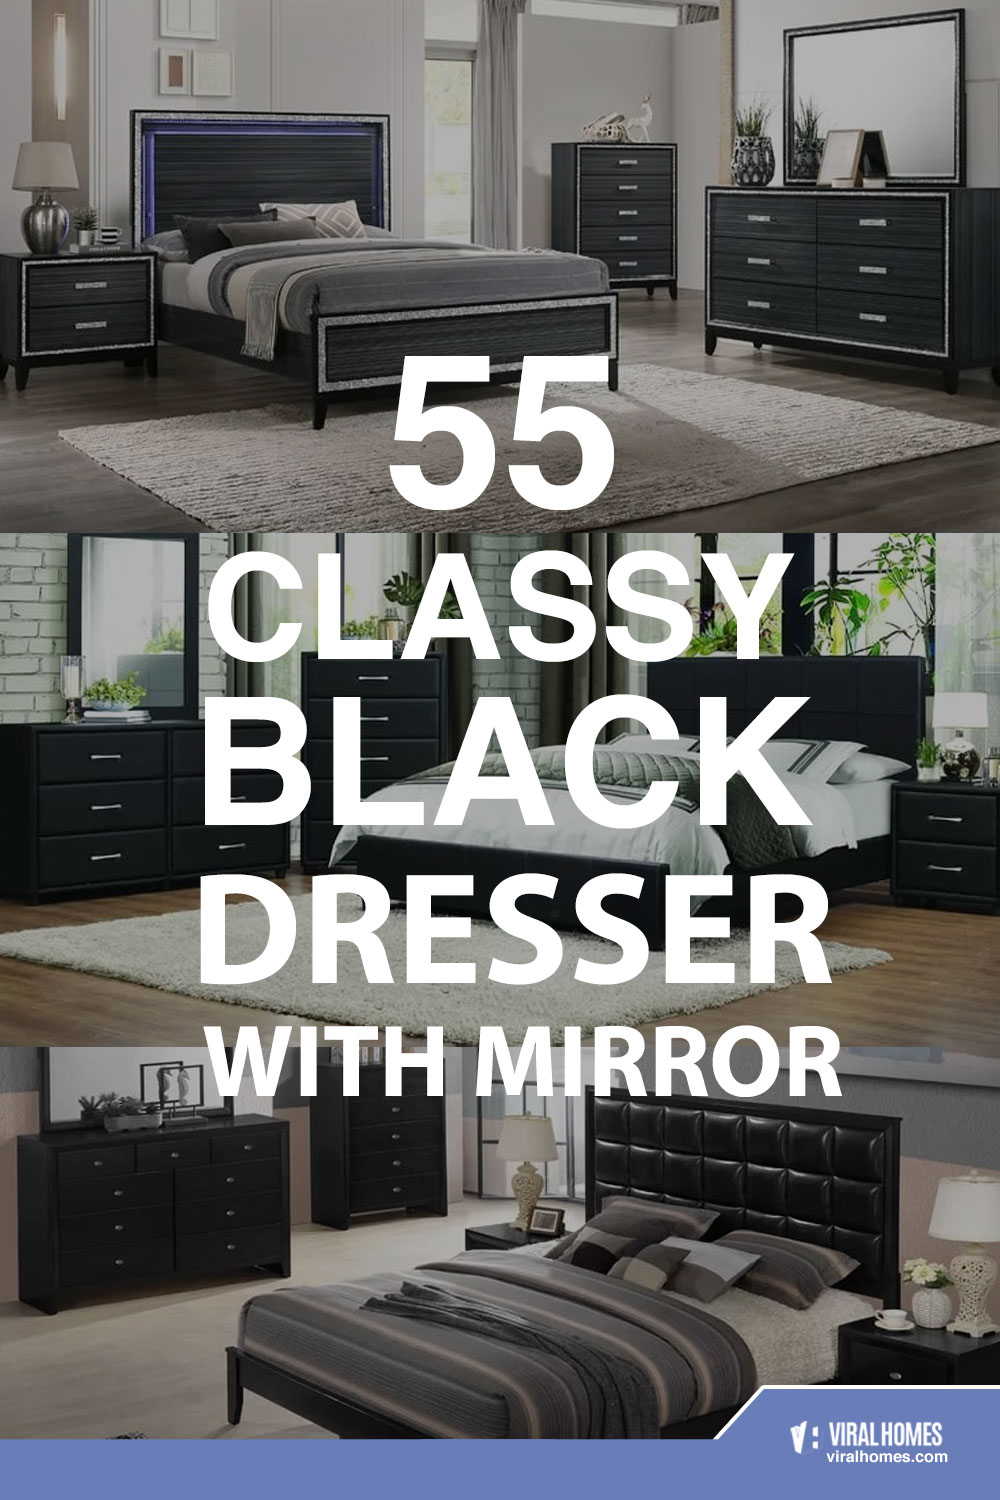 Classy Black Dresser with Mirror For the Elegant Homeowner